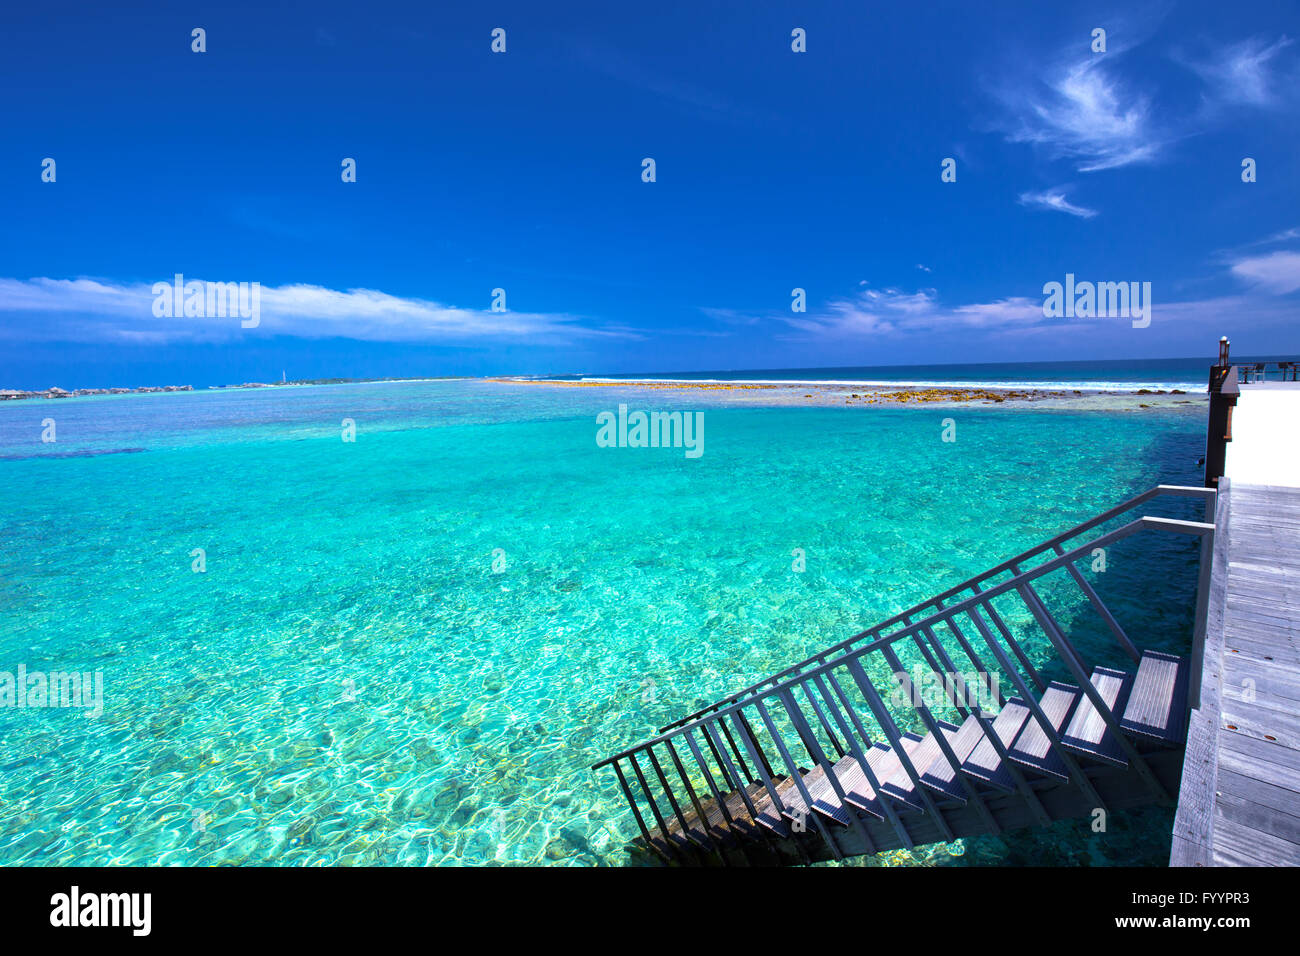 Tropical island with sandy beach with palm trees and tourquise clear water Stock Photo